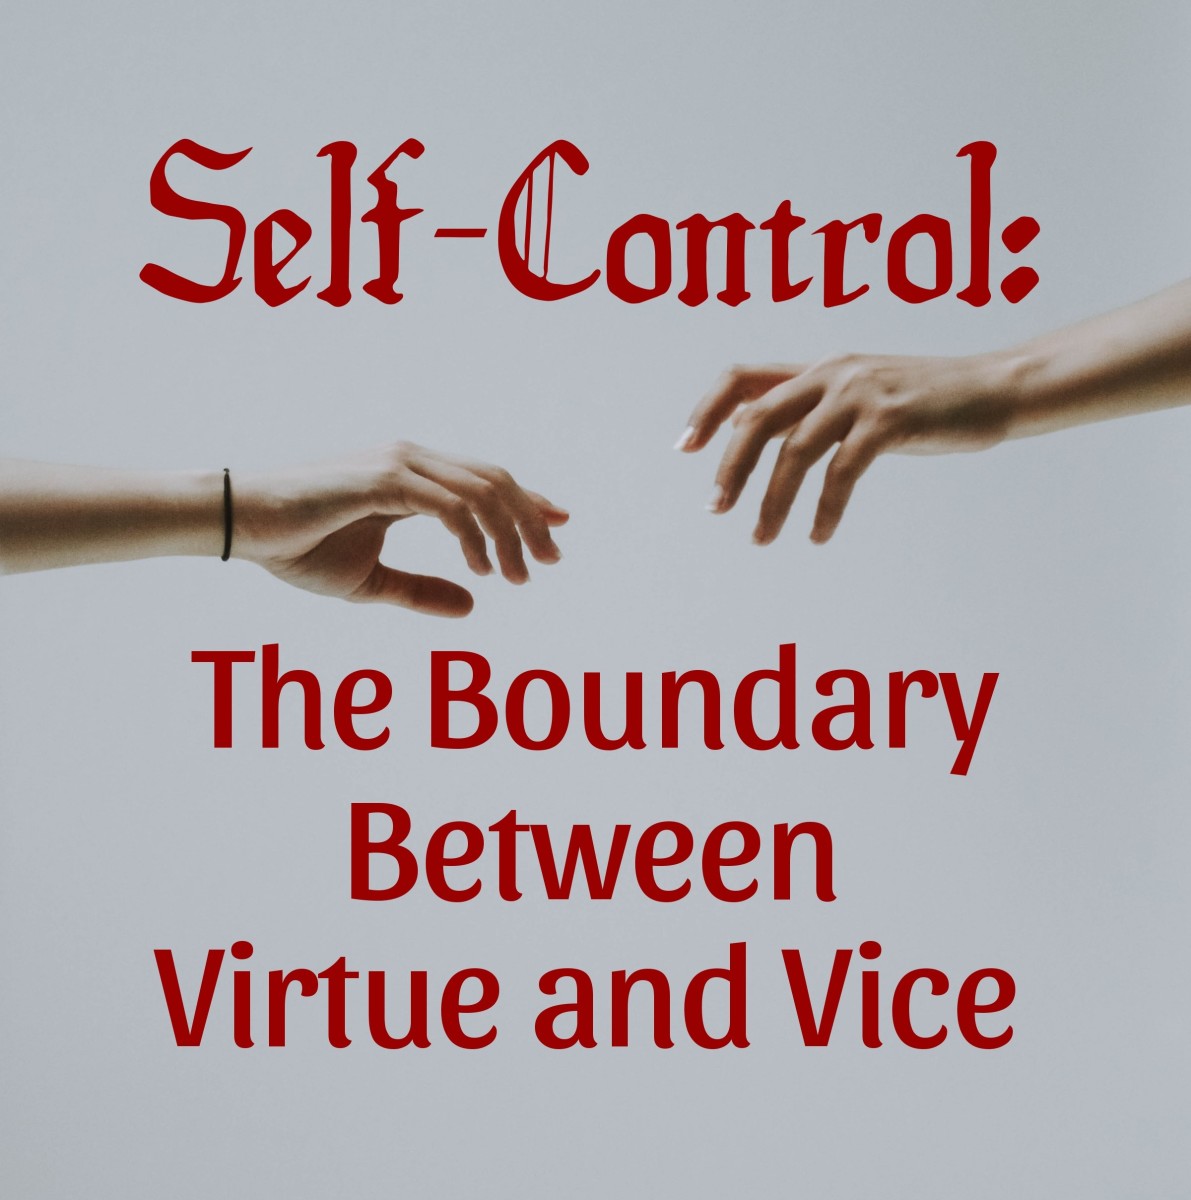 Self-control is the power to control one's actions, impulses, or emotions.